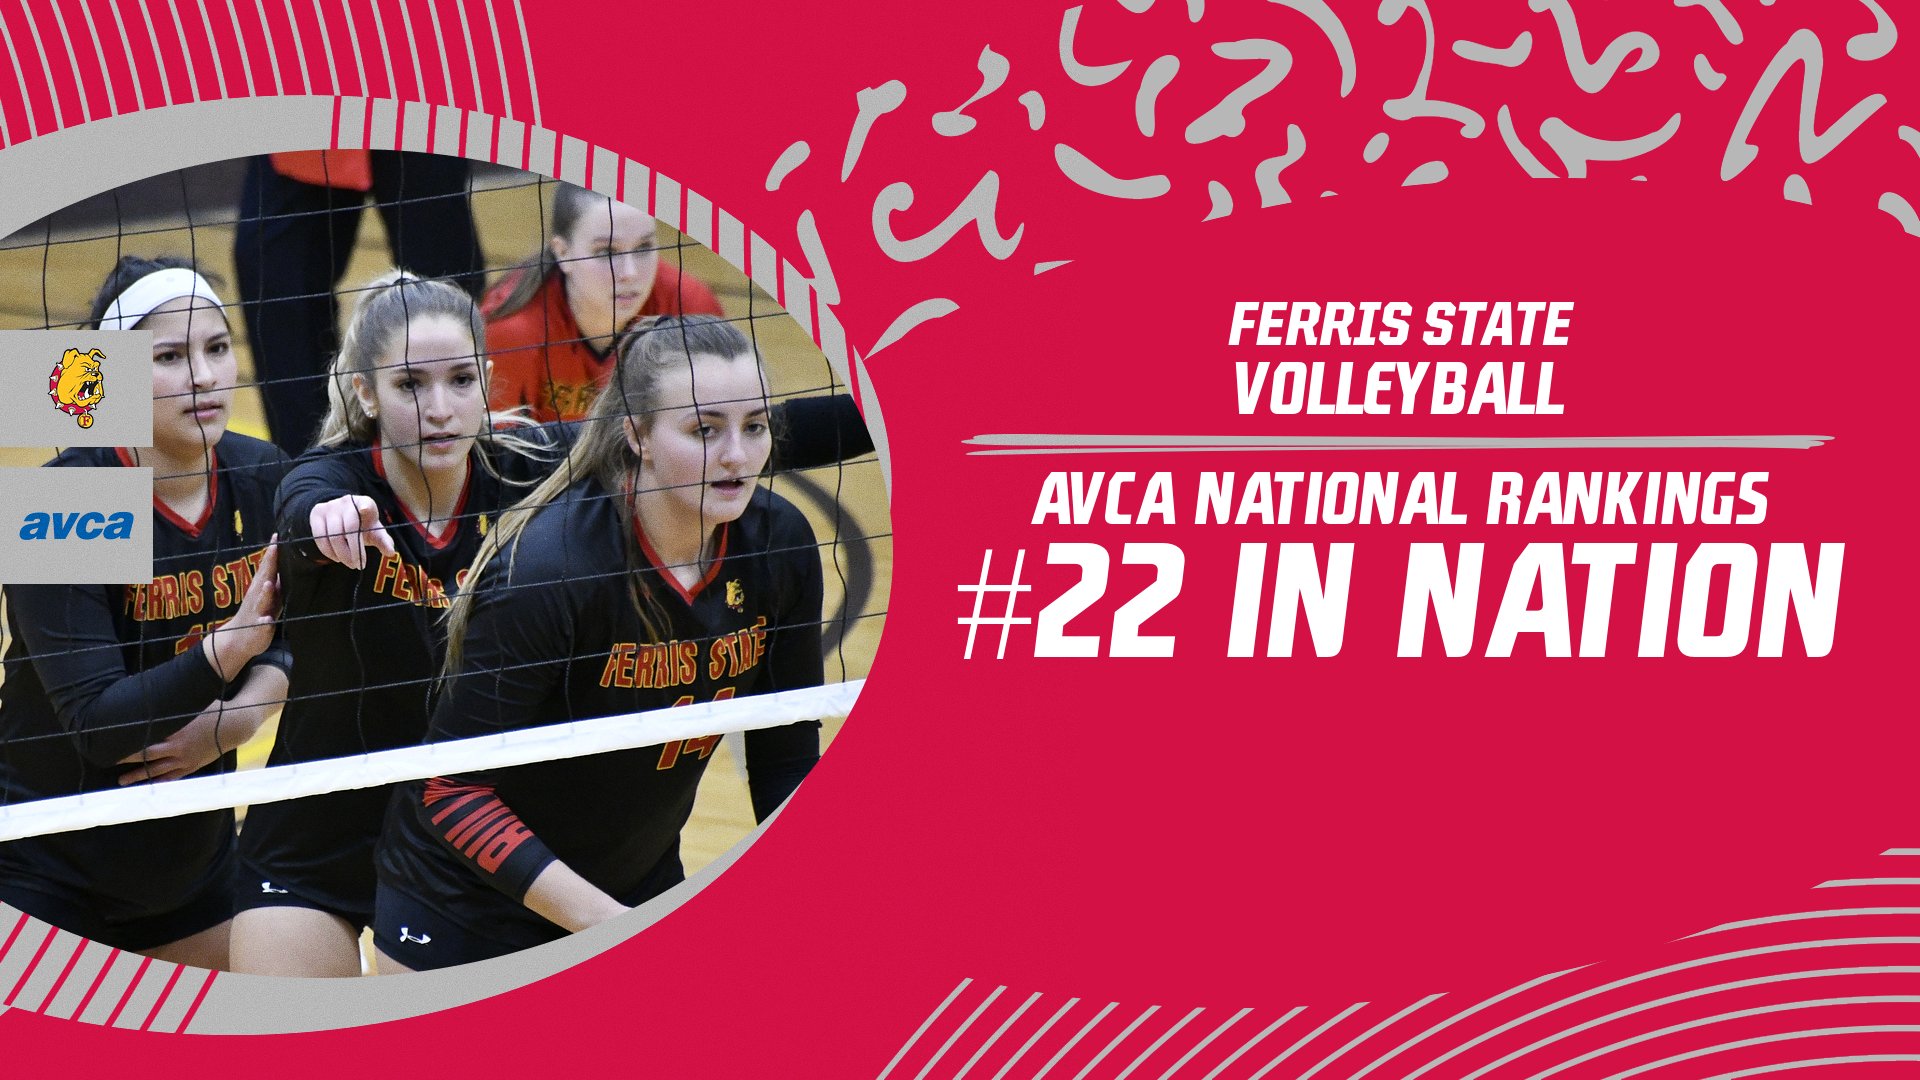 Ferris State Volleyball Moves Up Two Spots To #22 In The Nation This Week